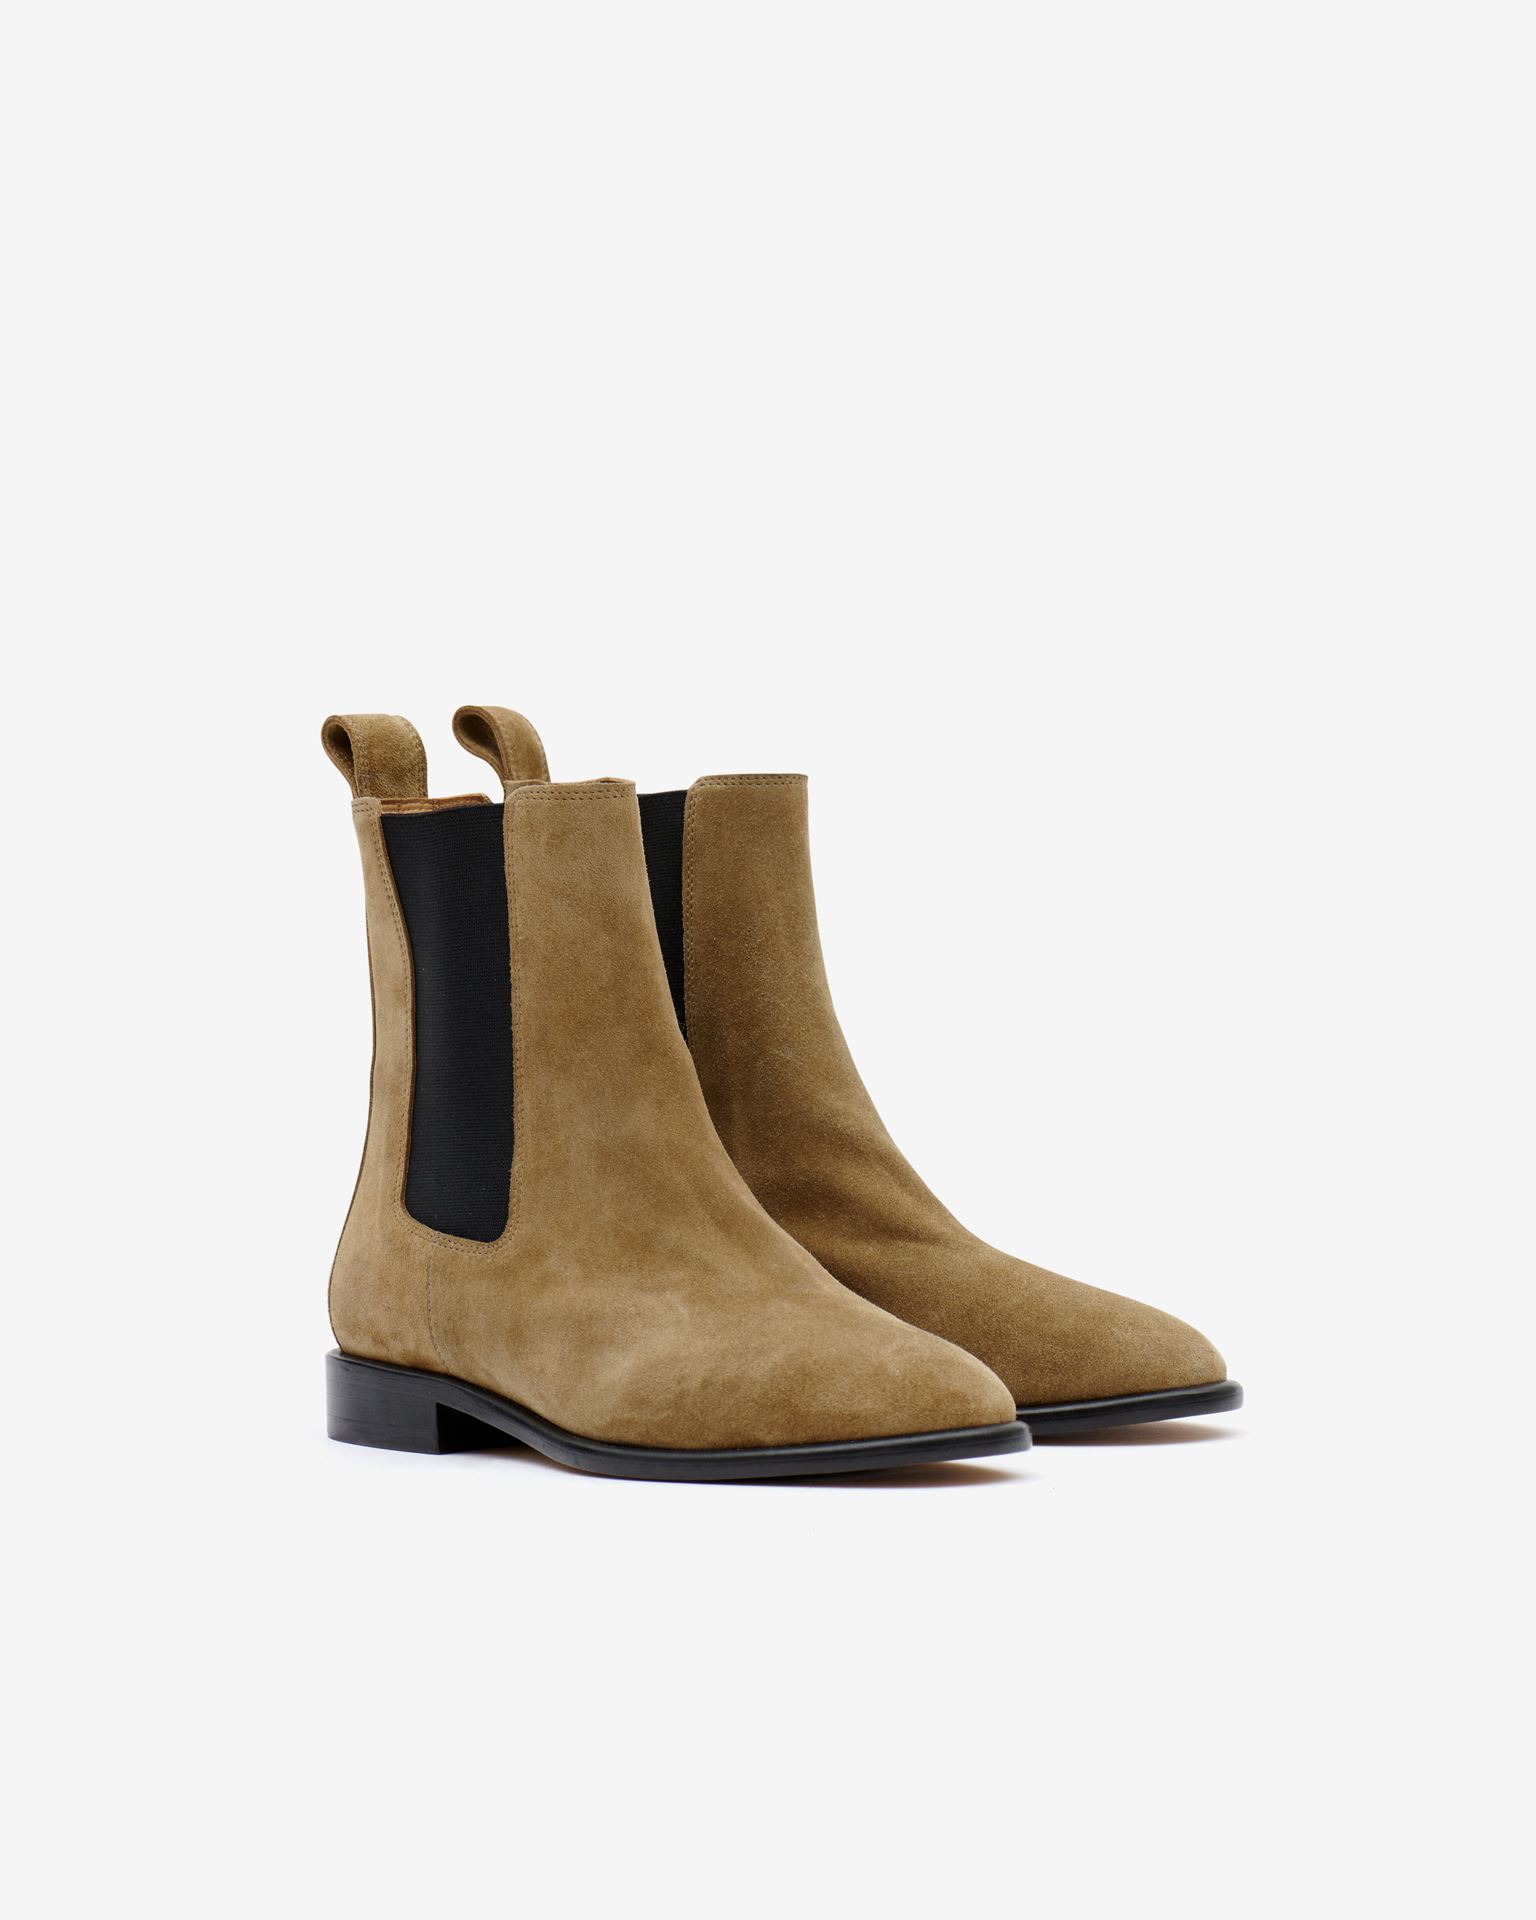 Isabel Marant, Galna Suede Ankle Boots - Women - Brown